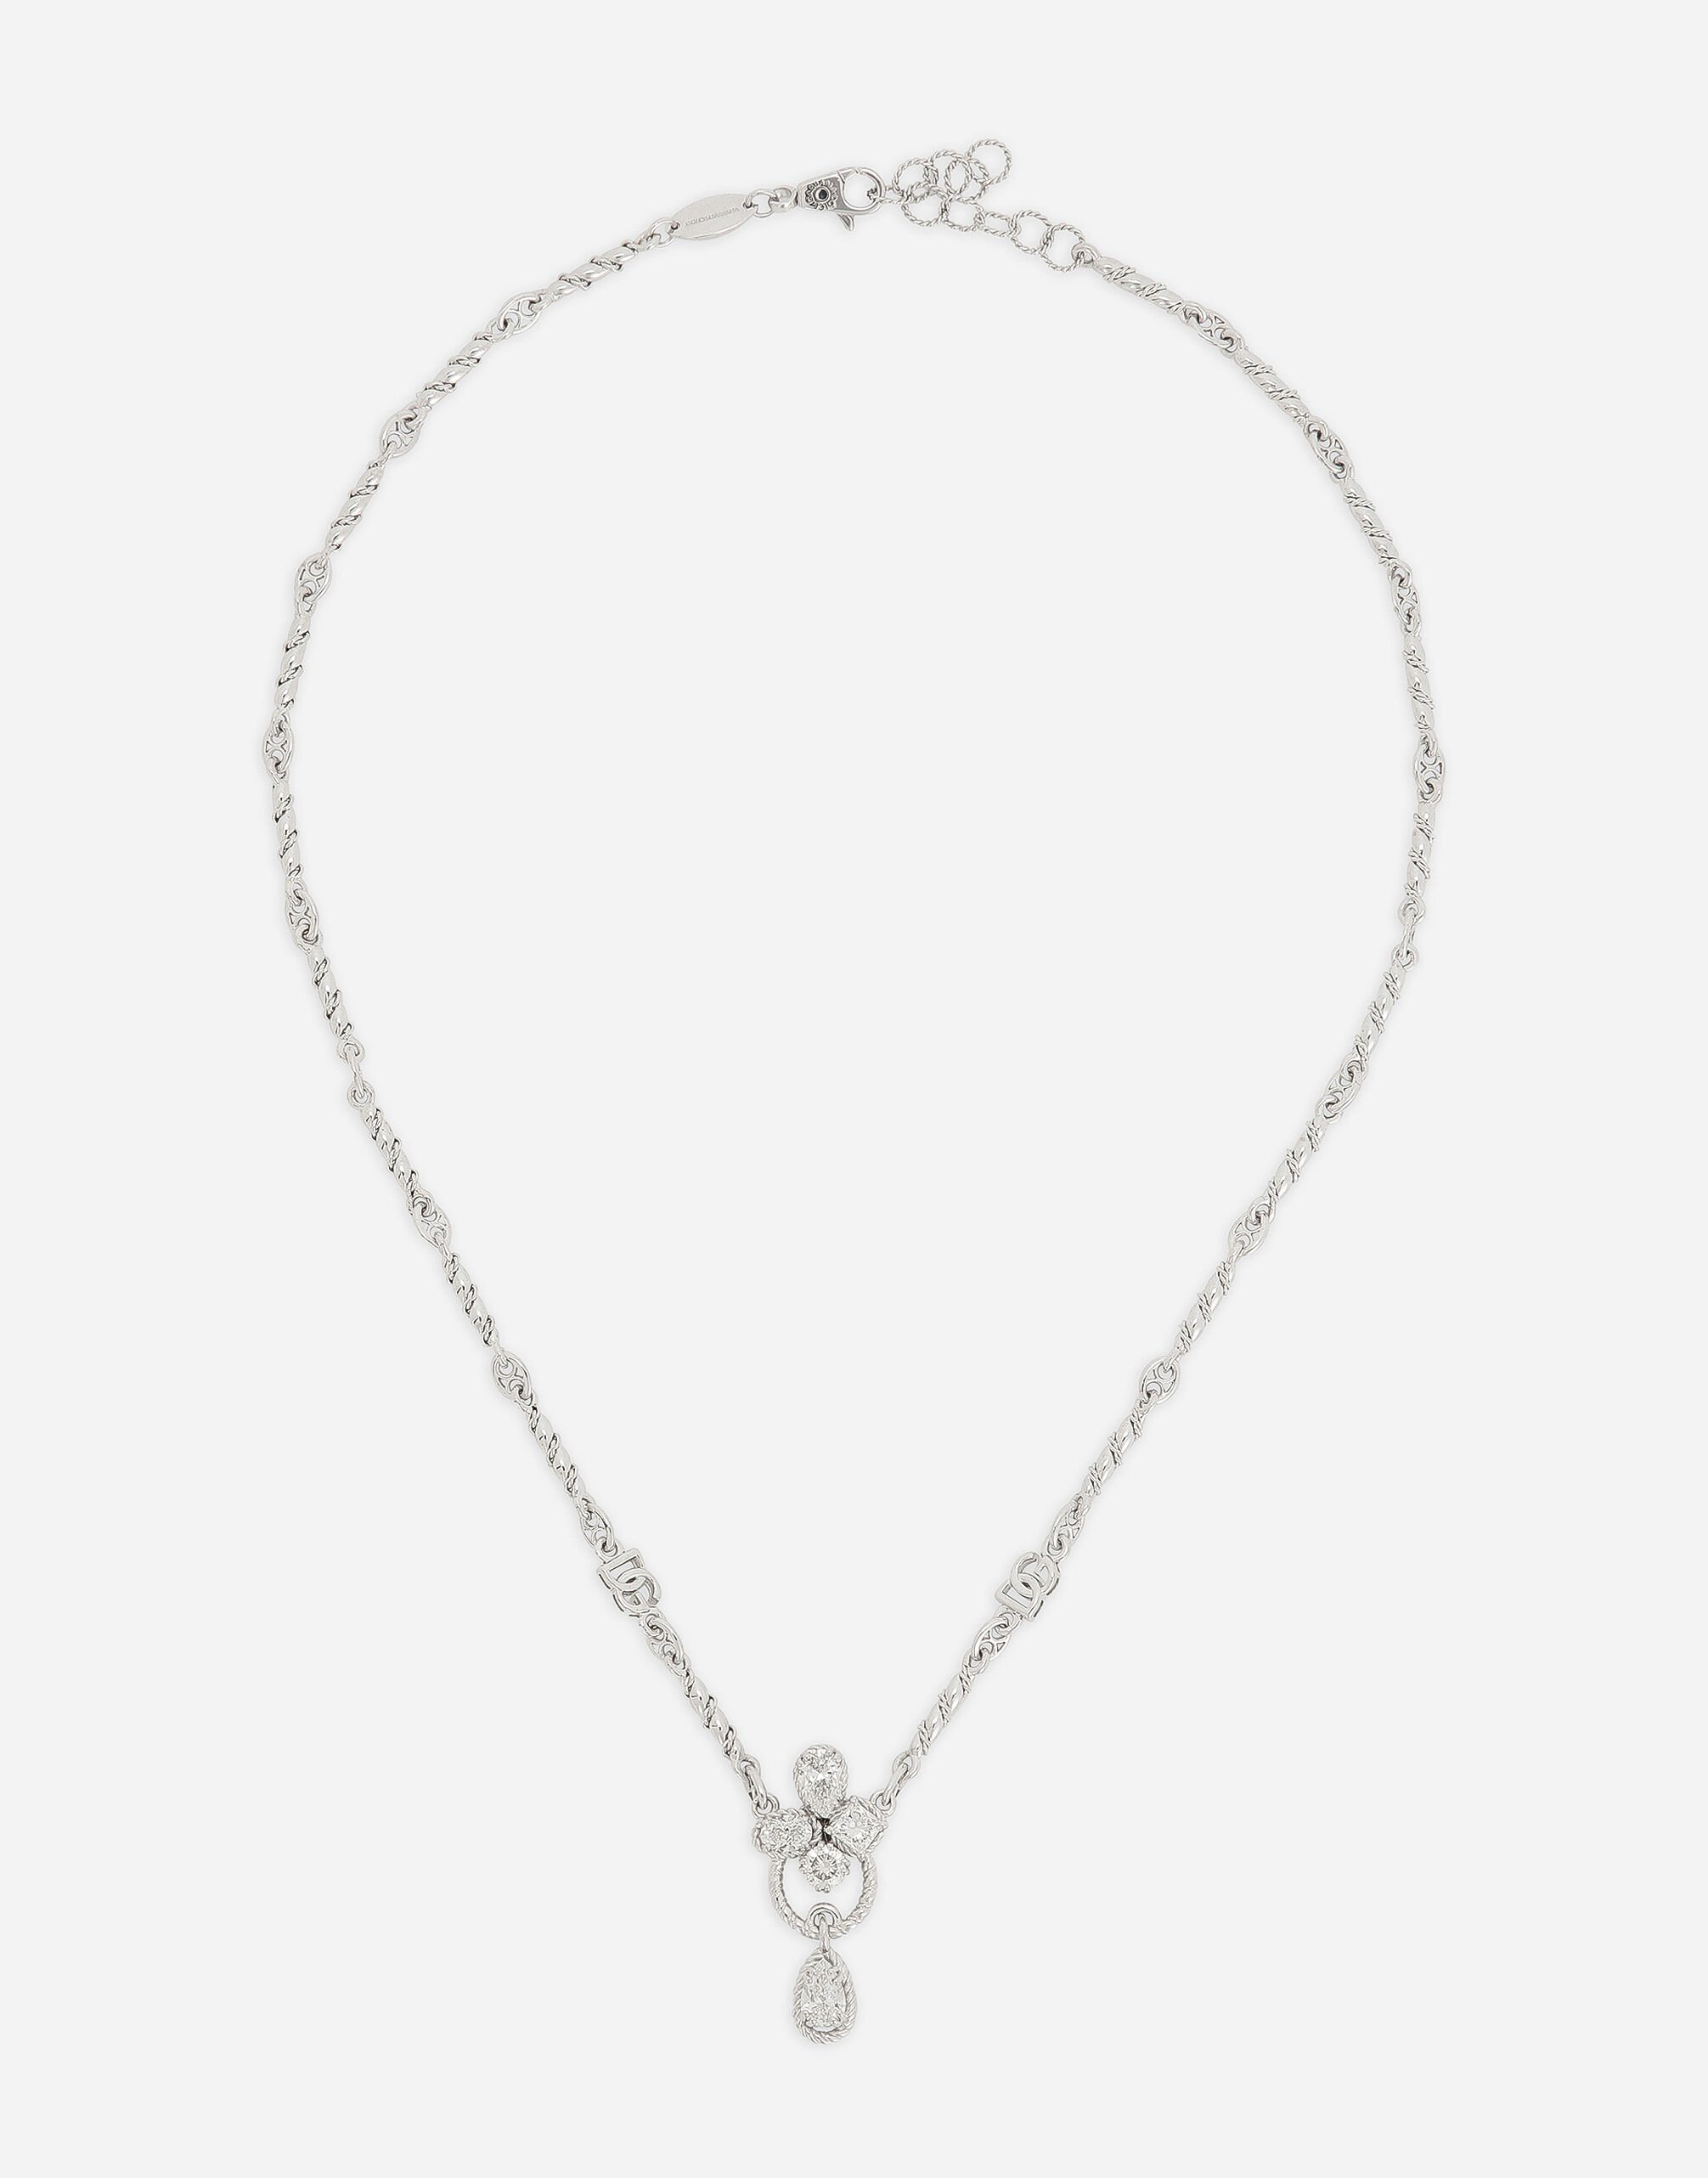 Dolce & Gabbana Easy Diamond necklace in white gold 18Kt and diamonds Gold WNQA3GWQC01